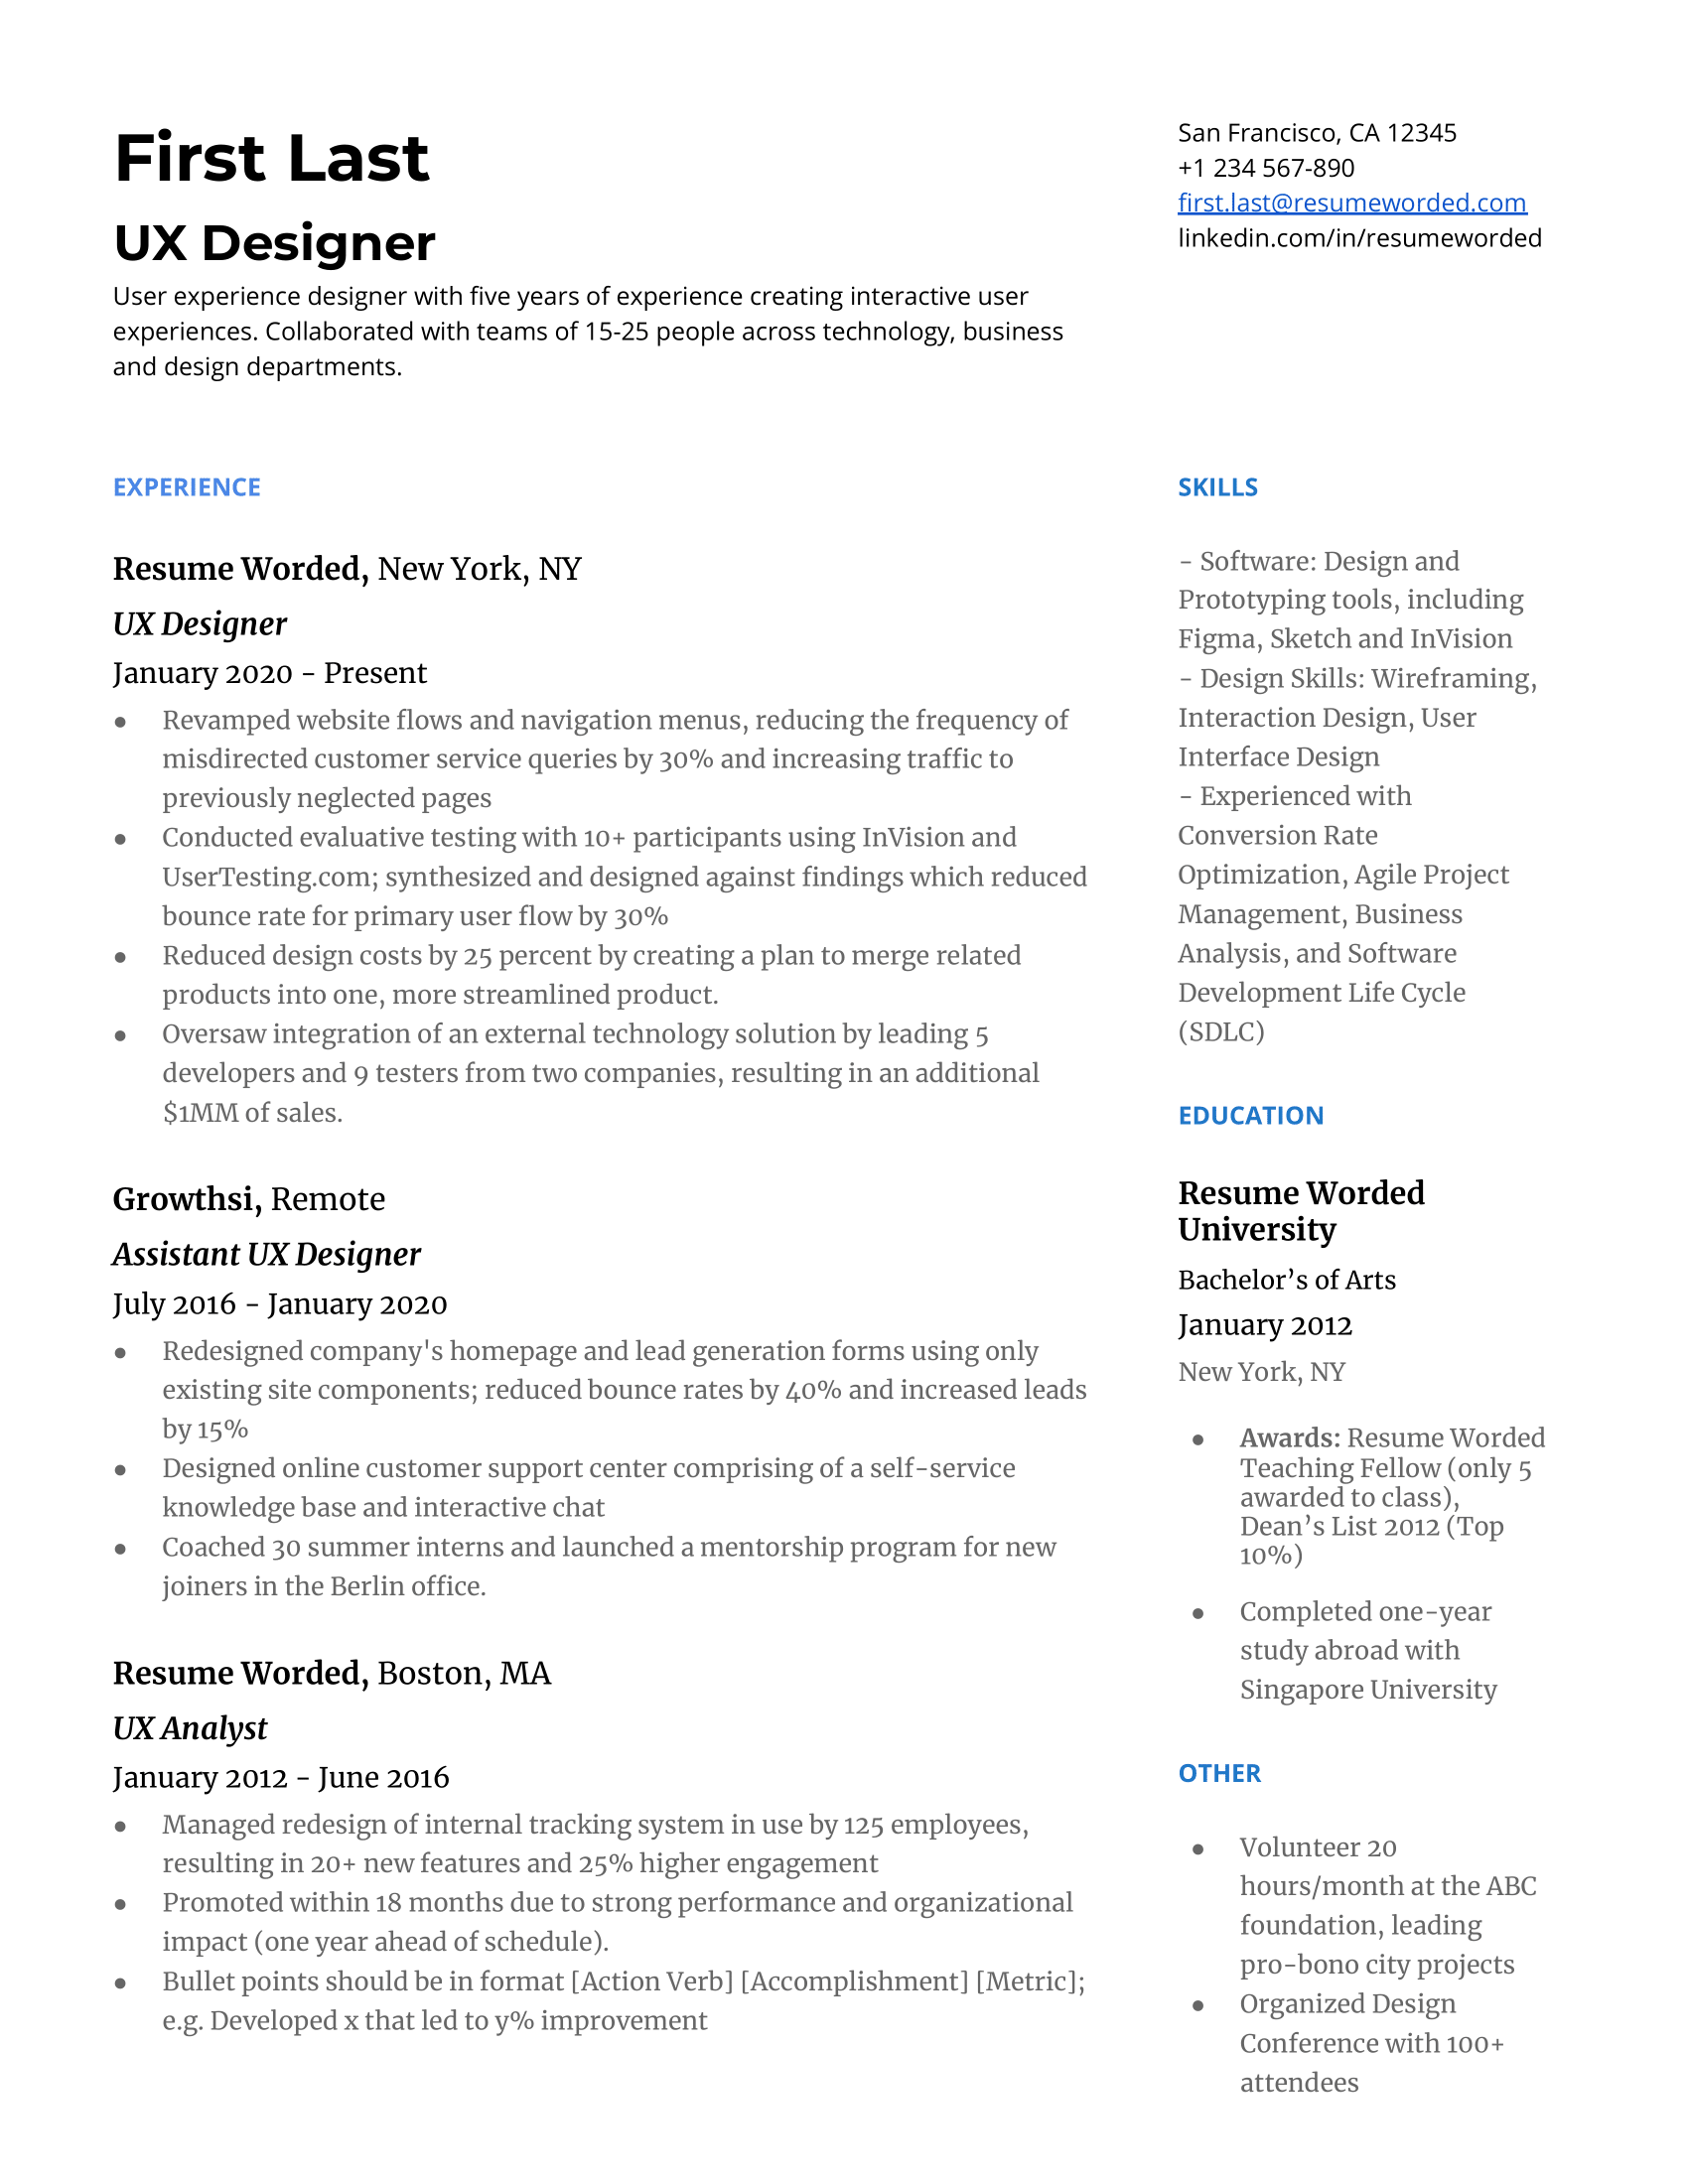 A User Experience Designer resume emphasizing skills in designing user-centered interfaces, conducting user research, and creating wireframes and prototypes.